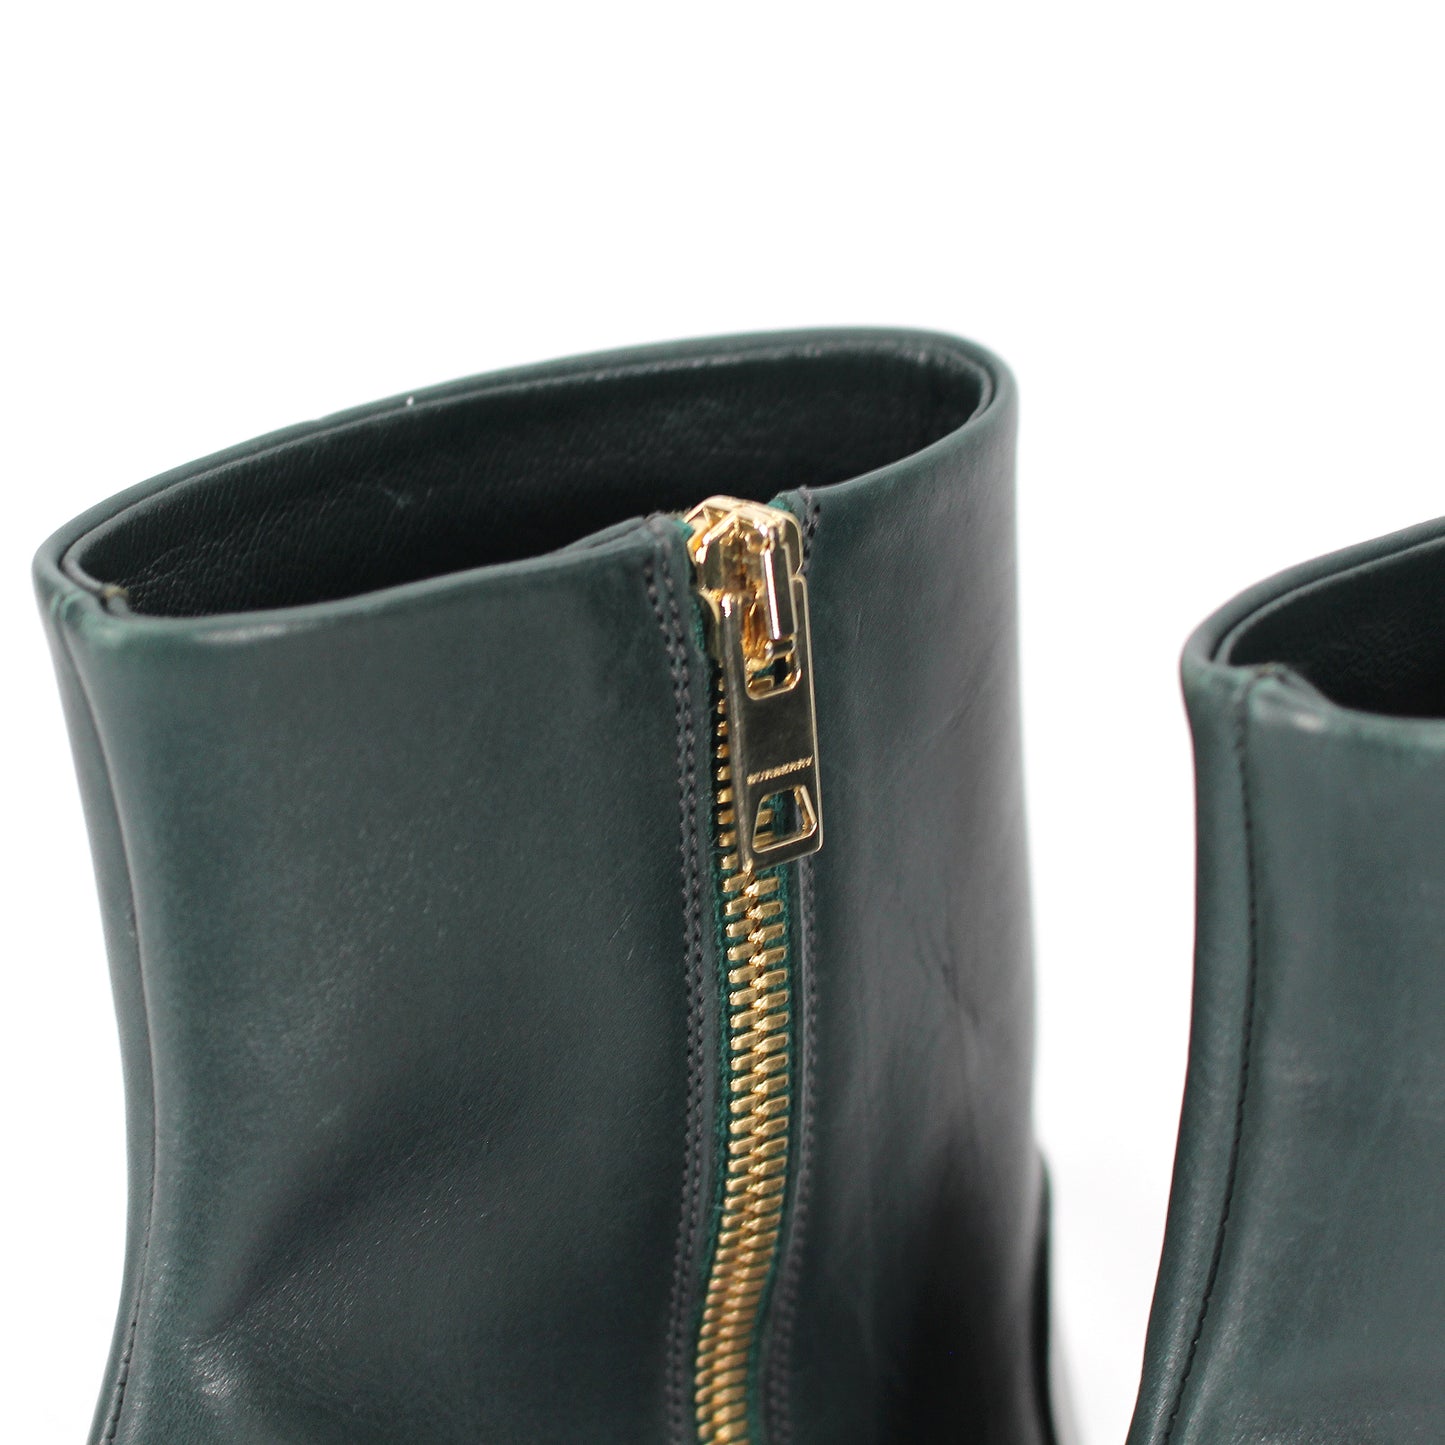 Burberry Westella Green Ankle Boots